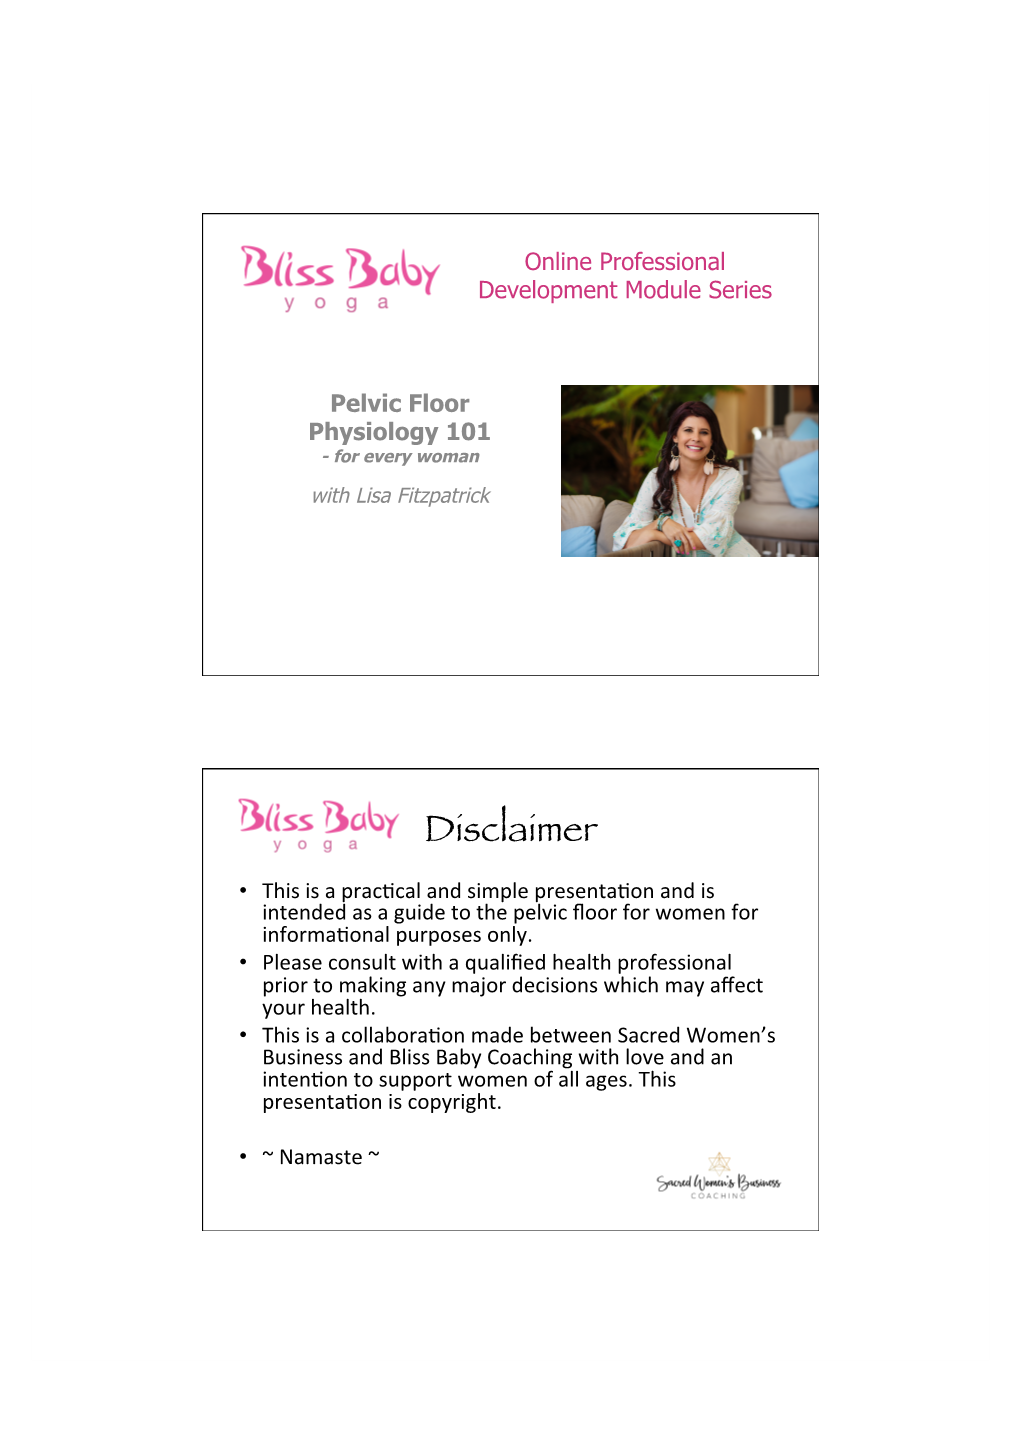 Pelvic Floor Physiology 101 FINAL for Bliss Baby .Pptx